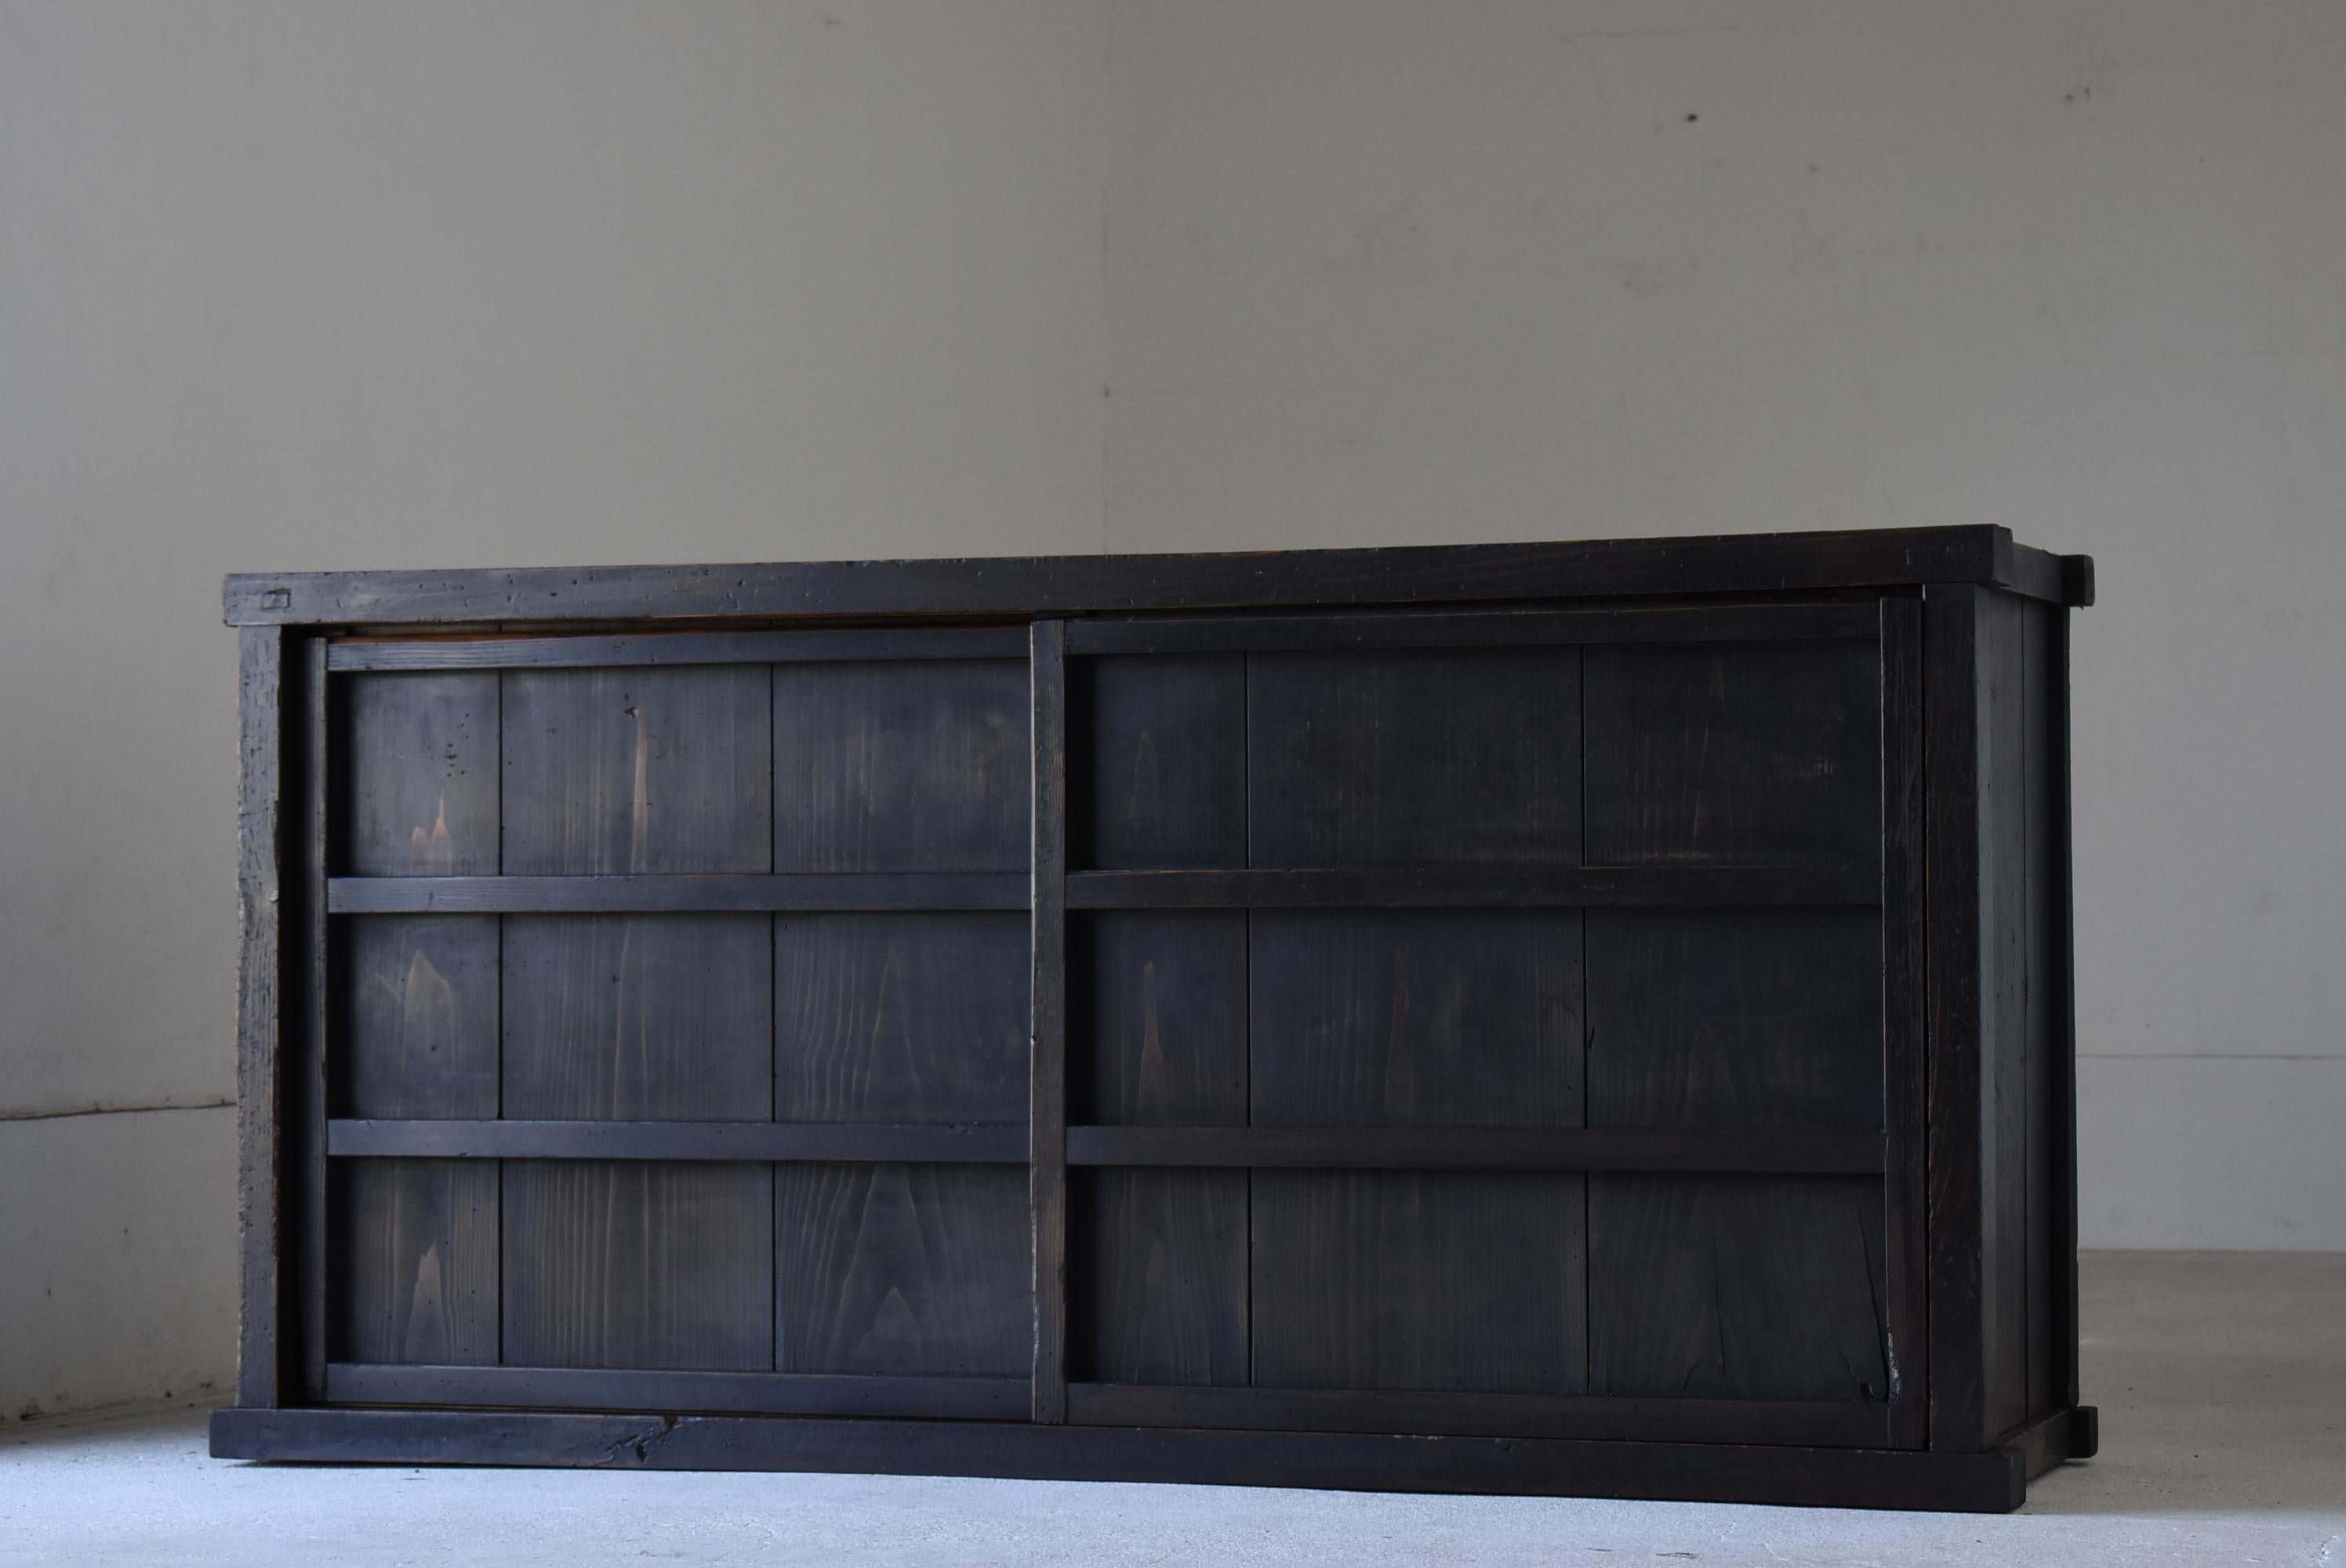 Very old, large Japanese black Tansu.
It is from the Meiji period (1860s-1900s).
It is made of cedar wood.

It is rugged and beautiful with no unnecessary decoration.
The blackened tint from age is also very cool.

The doors move